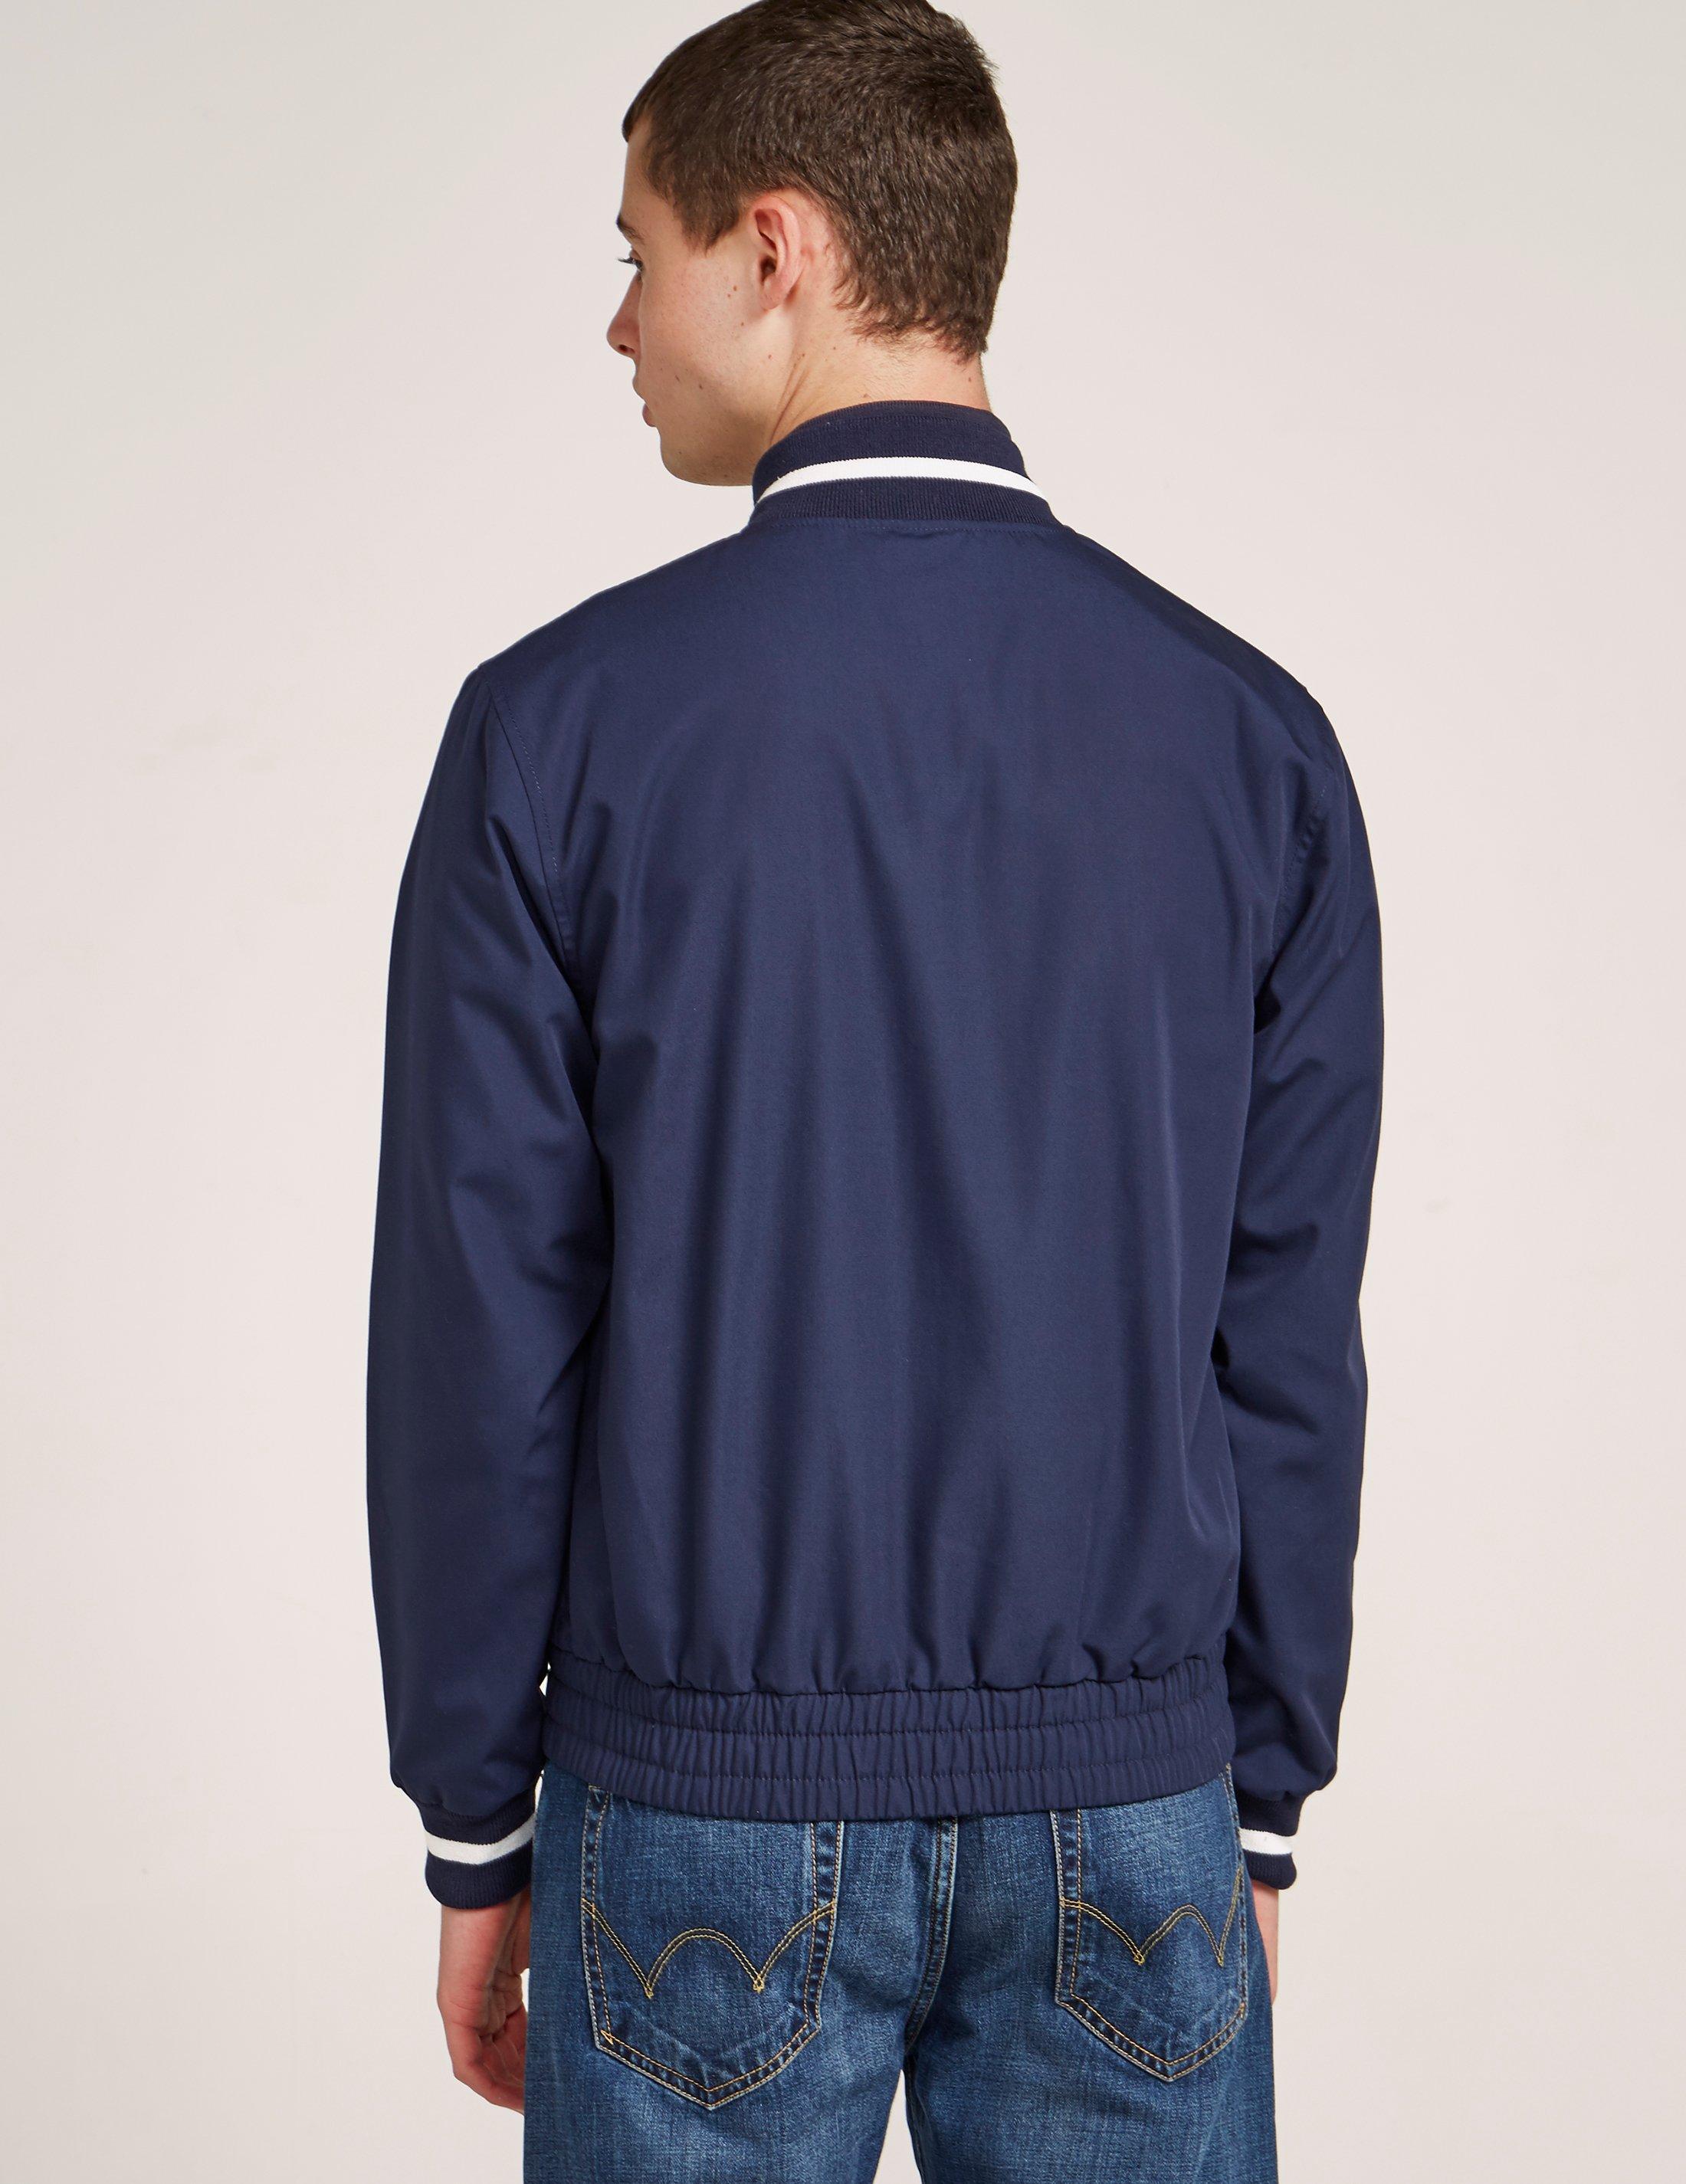 Fred Perry Cotton Reissue Made In England Bomber Jacket in Navy (Blue ...